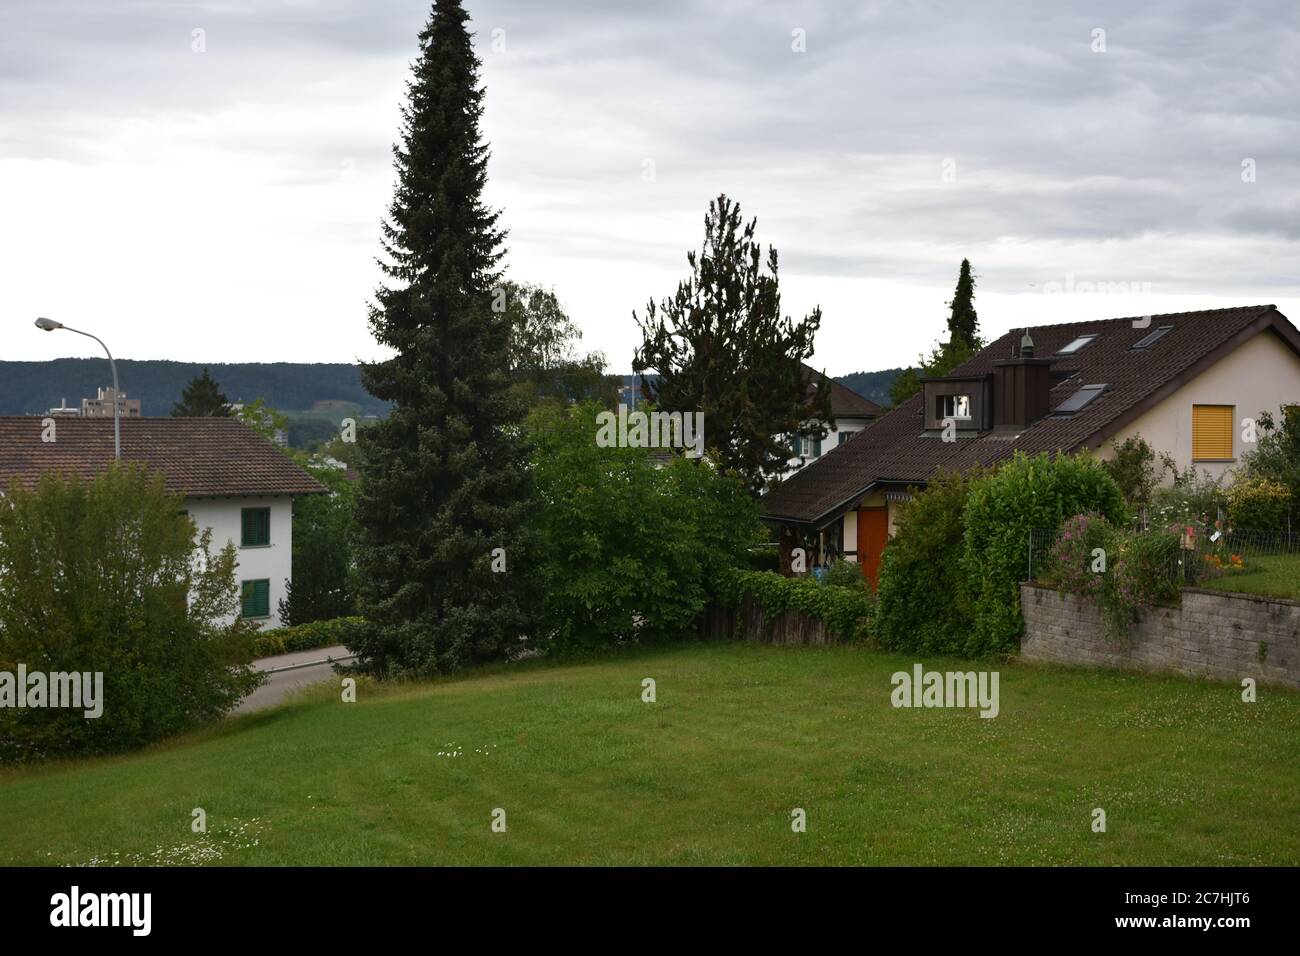 Typical family houses in Switzerland countryside and villages in canton Zurich with gardens full of green vegetables and fruit trees during summer. Stock Photo